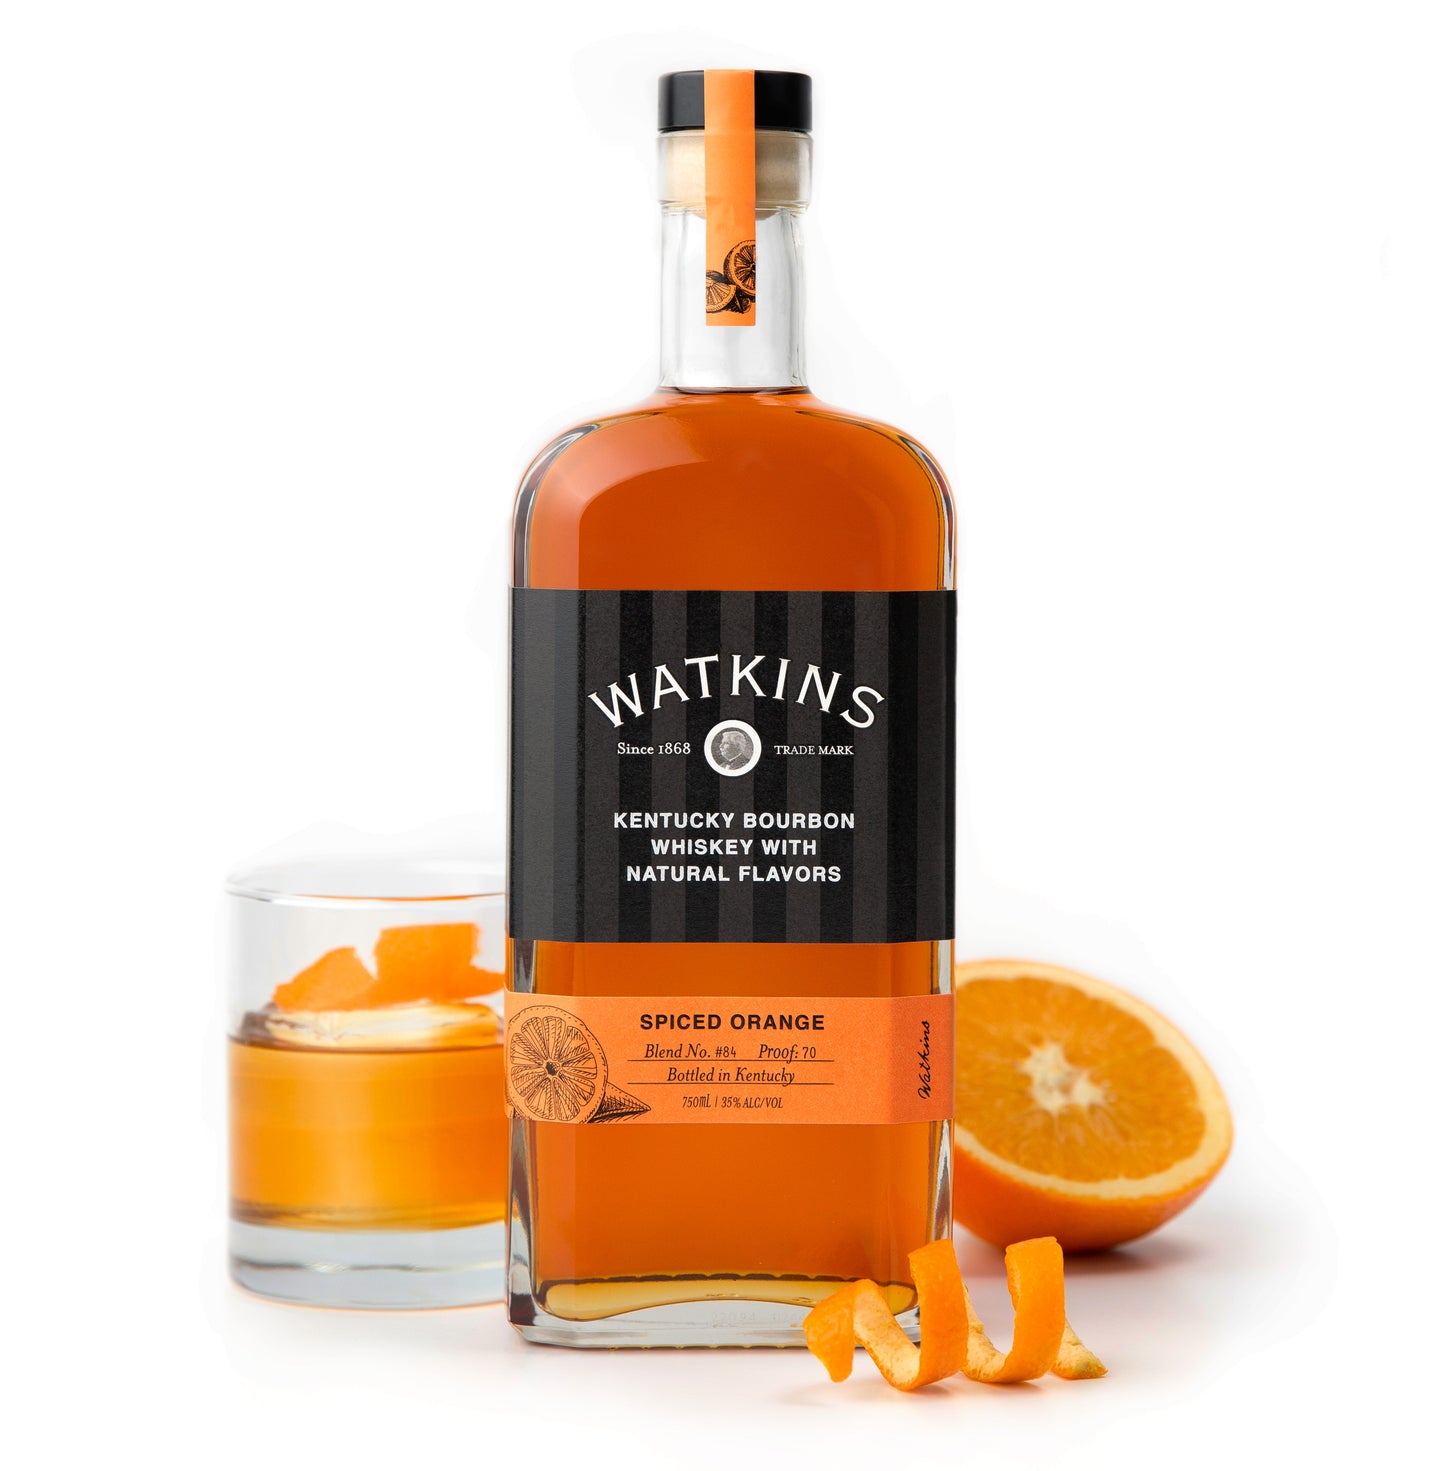 Spiced Orange Bourbon Whiskey with Natural Flavors